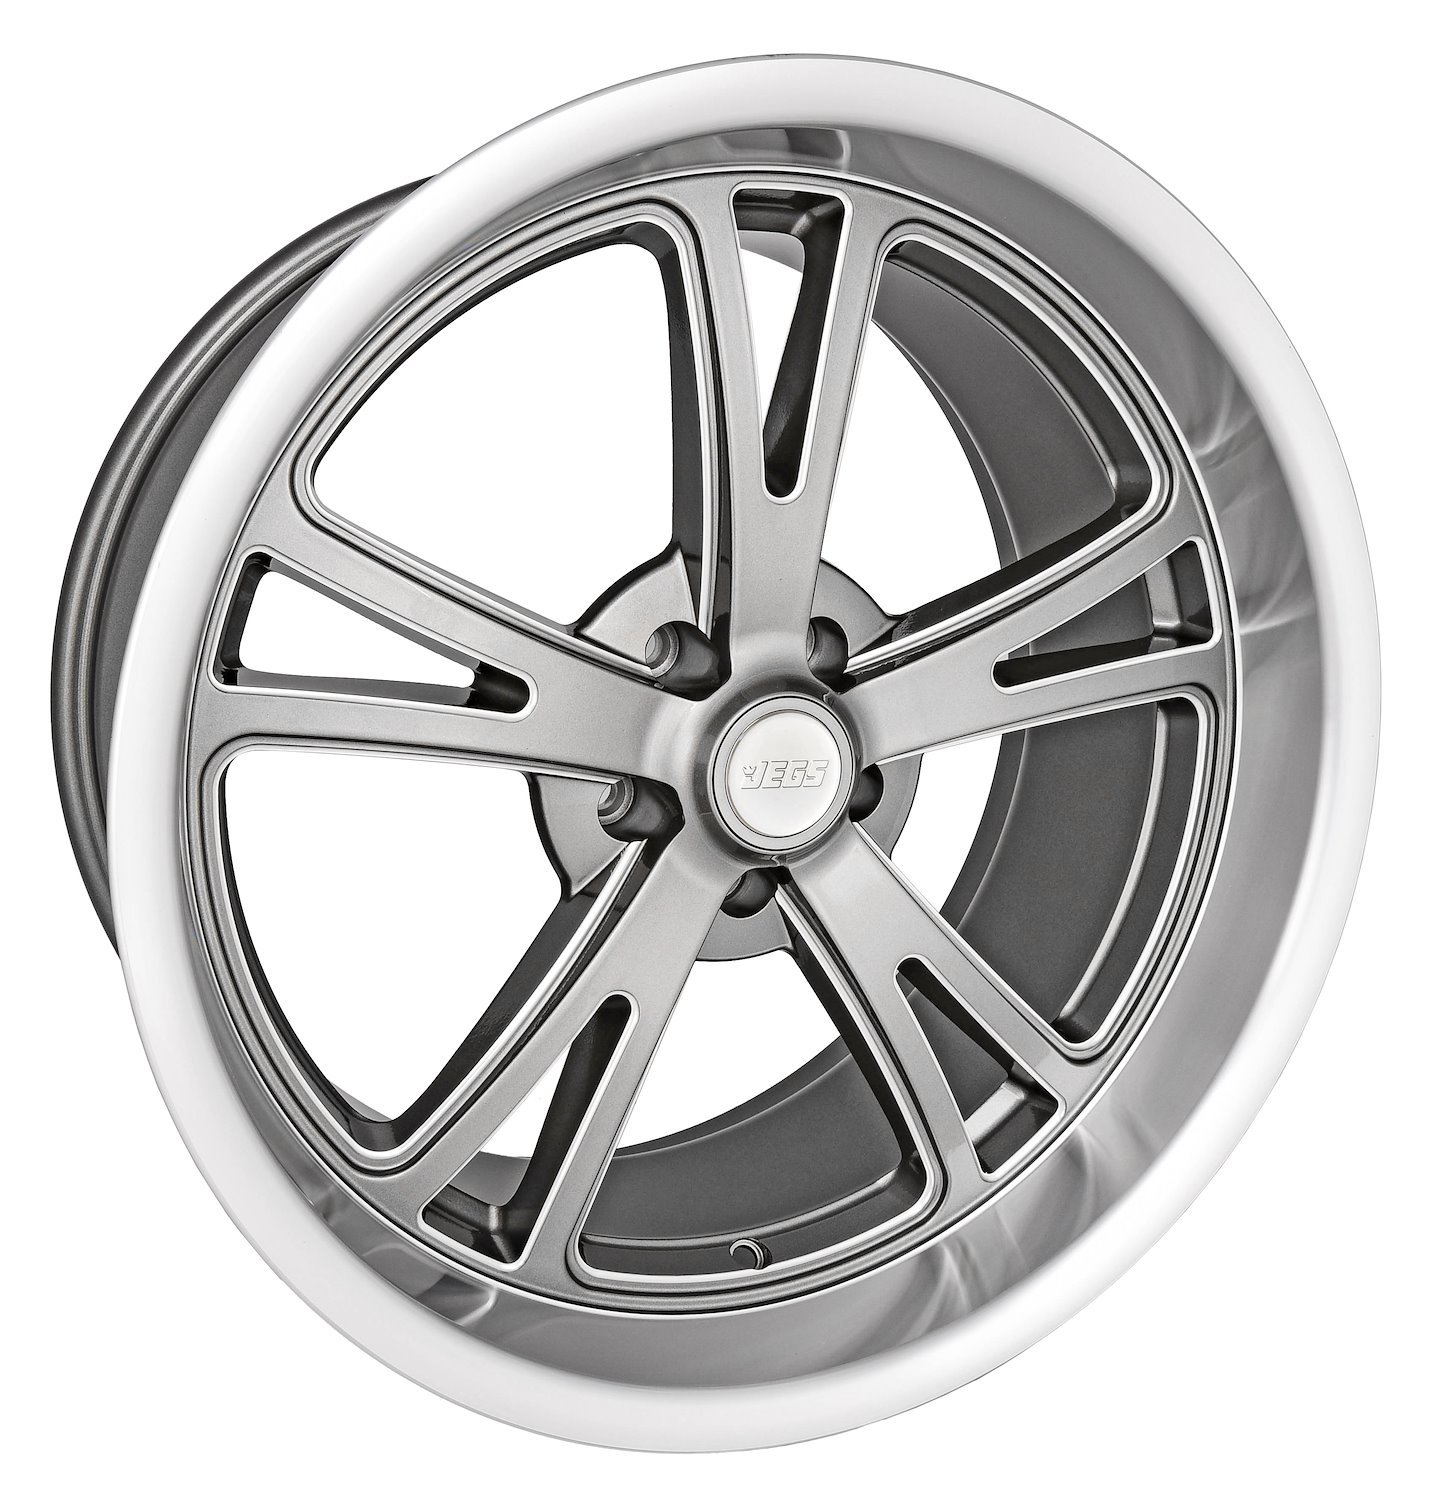 JV-1 Wheel [Size: 18" x 9.50"] Grey Spokes with Milled Outer Lip